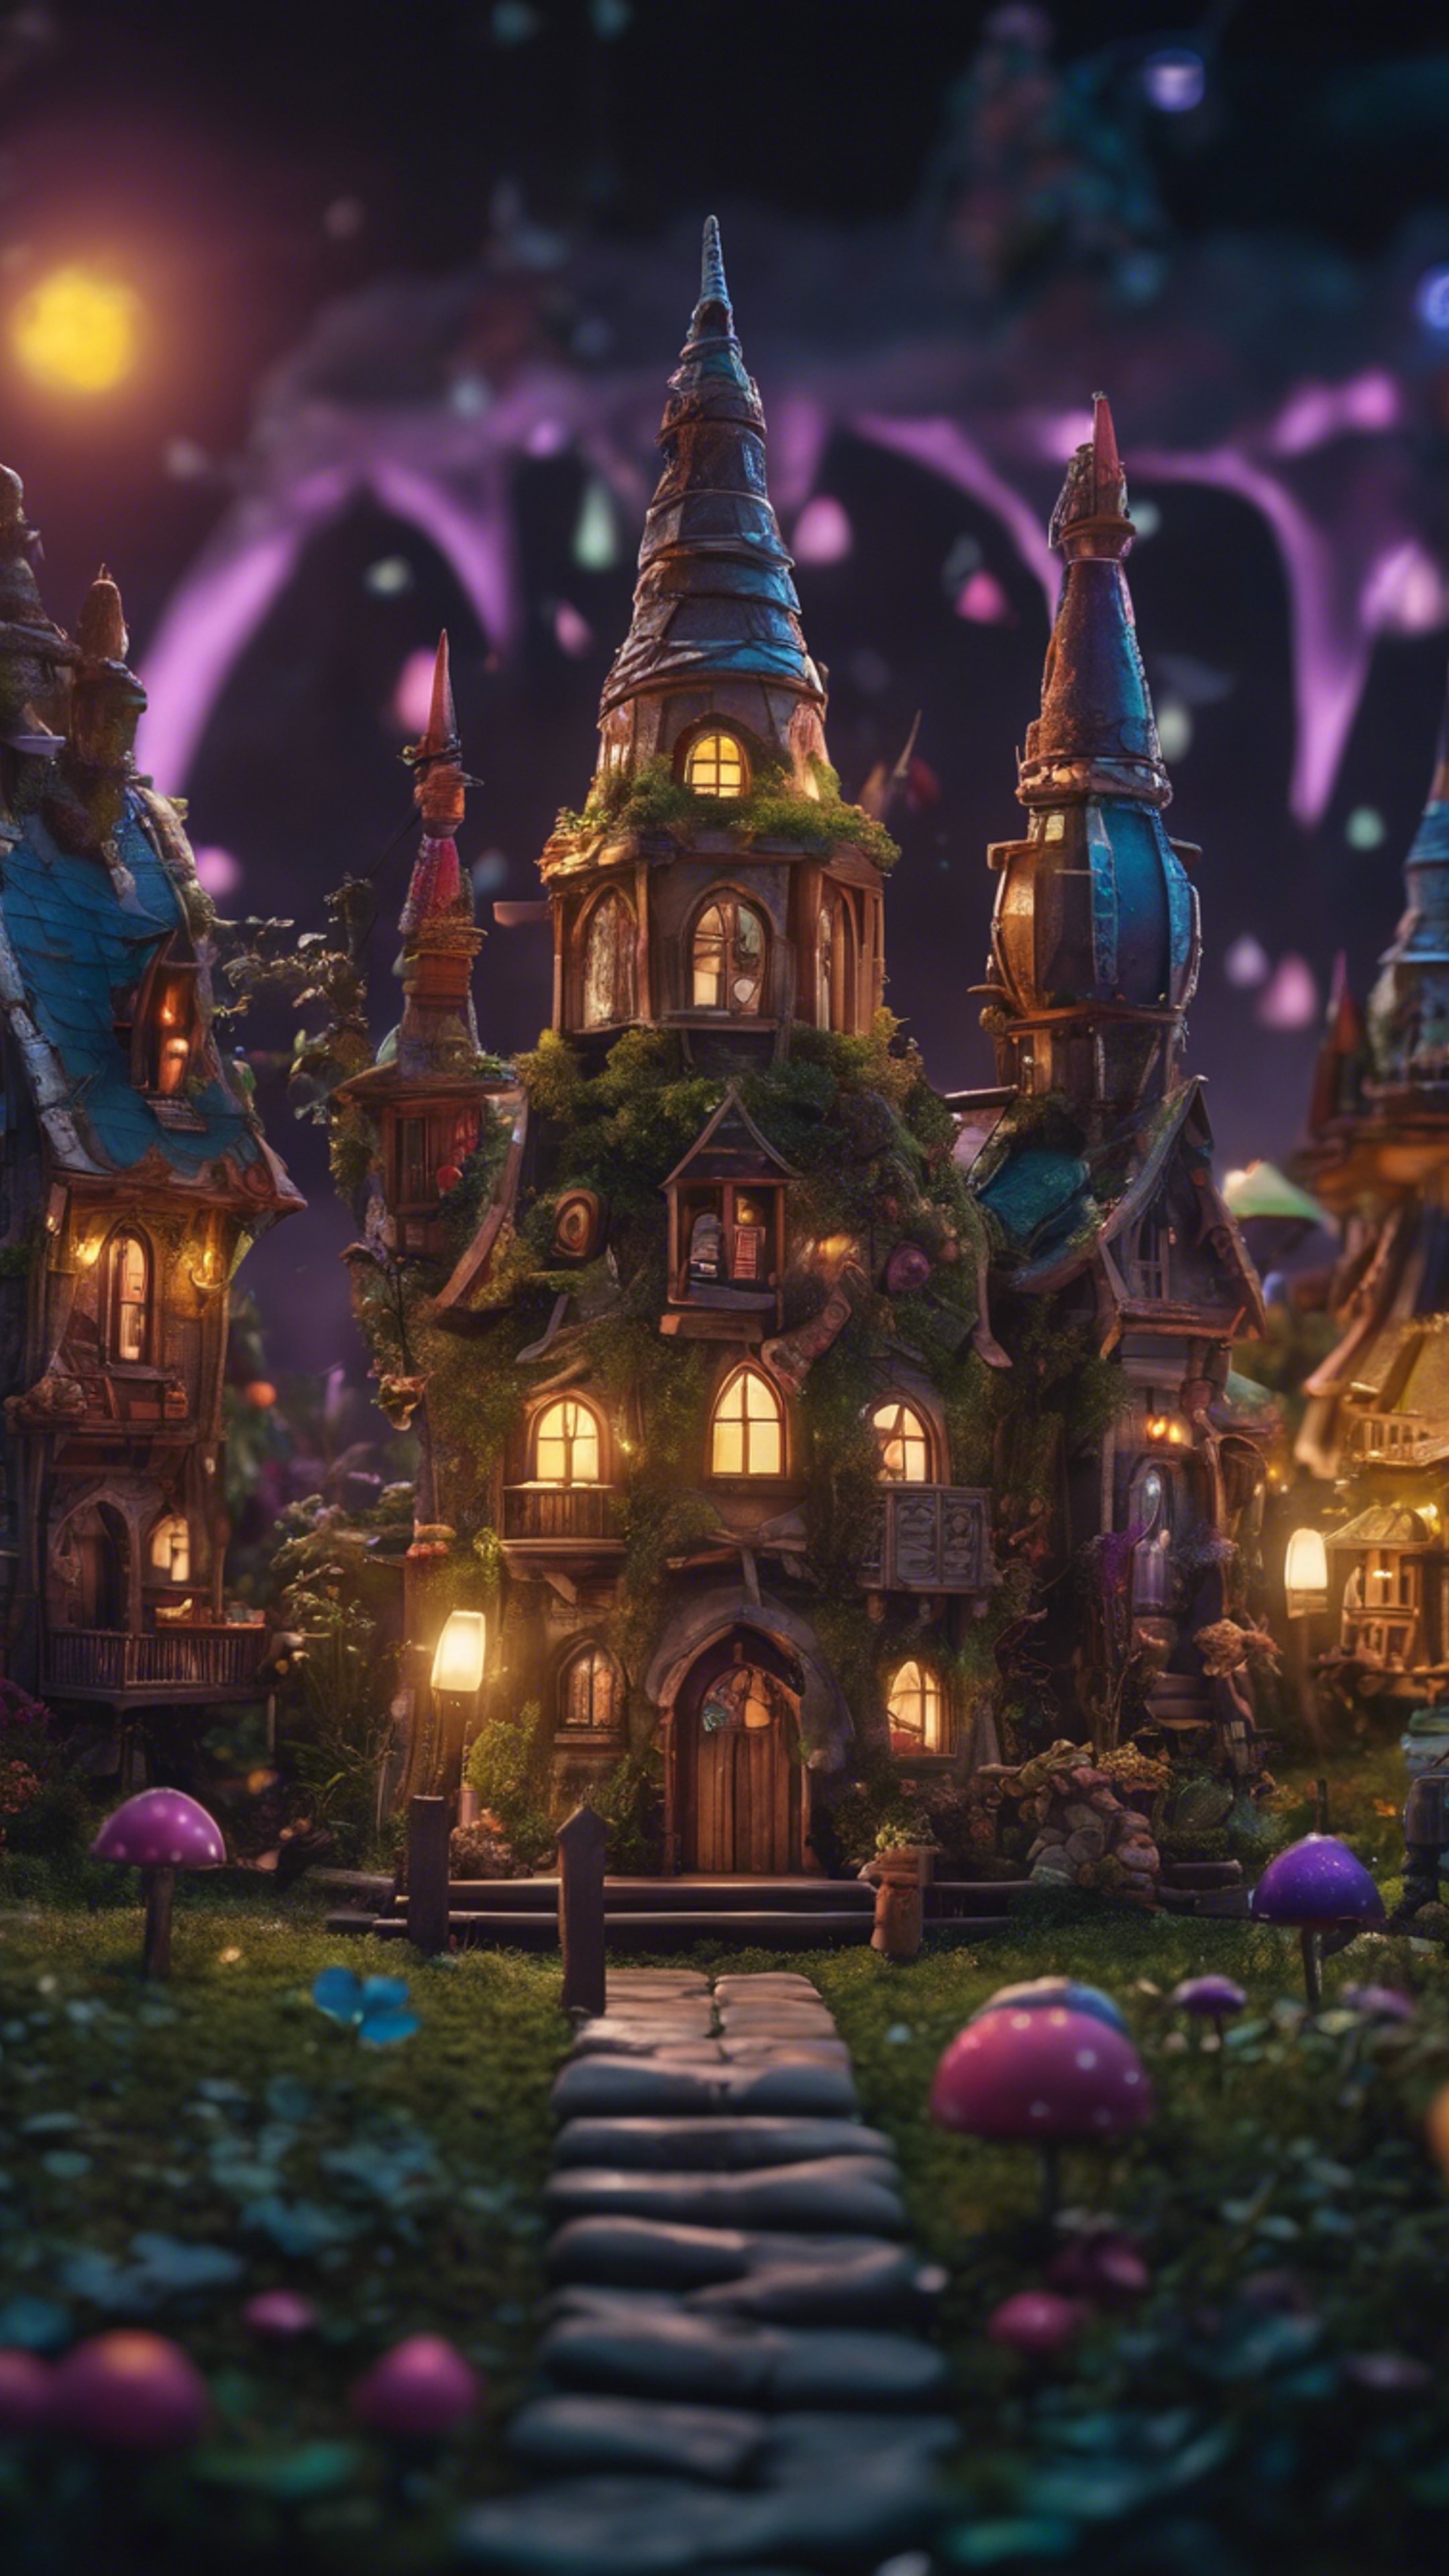 A garden gnomes' village adorned with gothic architecture, glowing under the neon night sky. Wallpaper[418d9ae14d0f48449fe1]